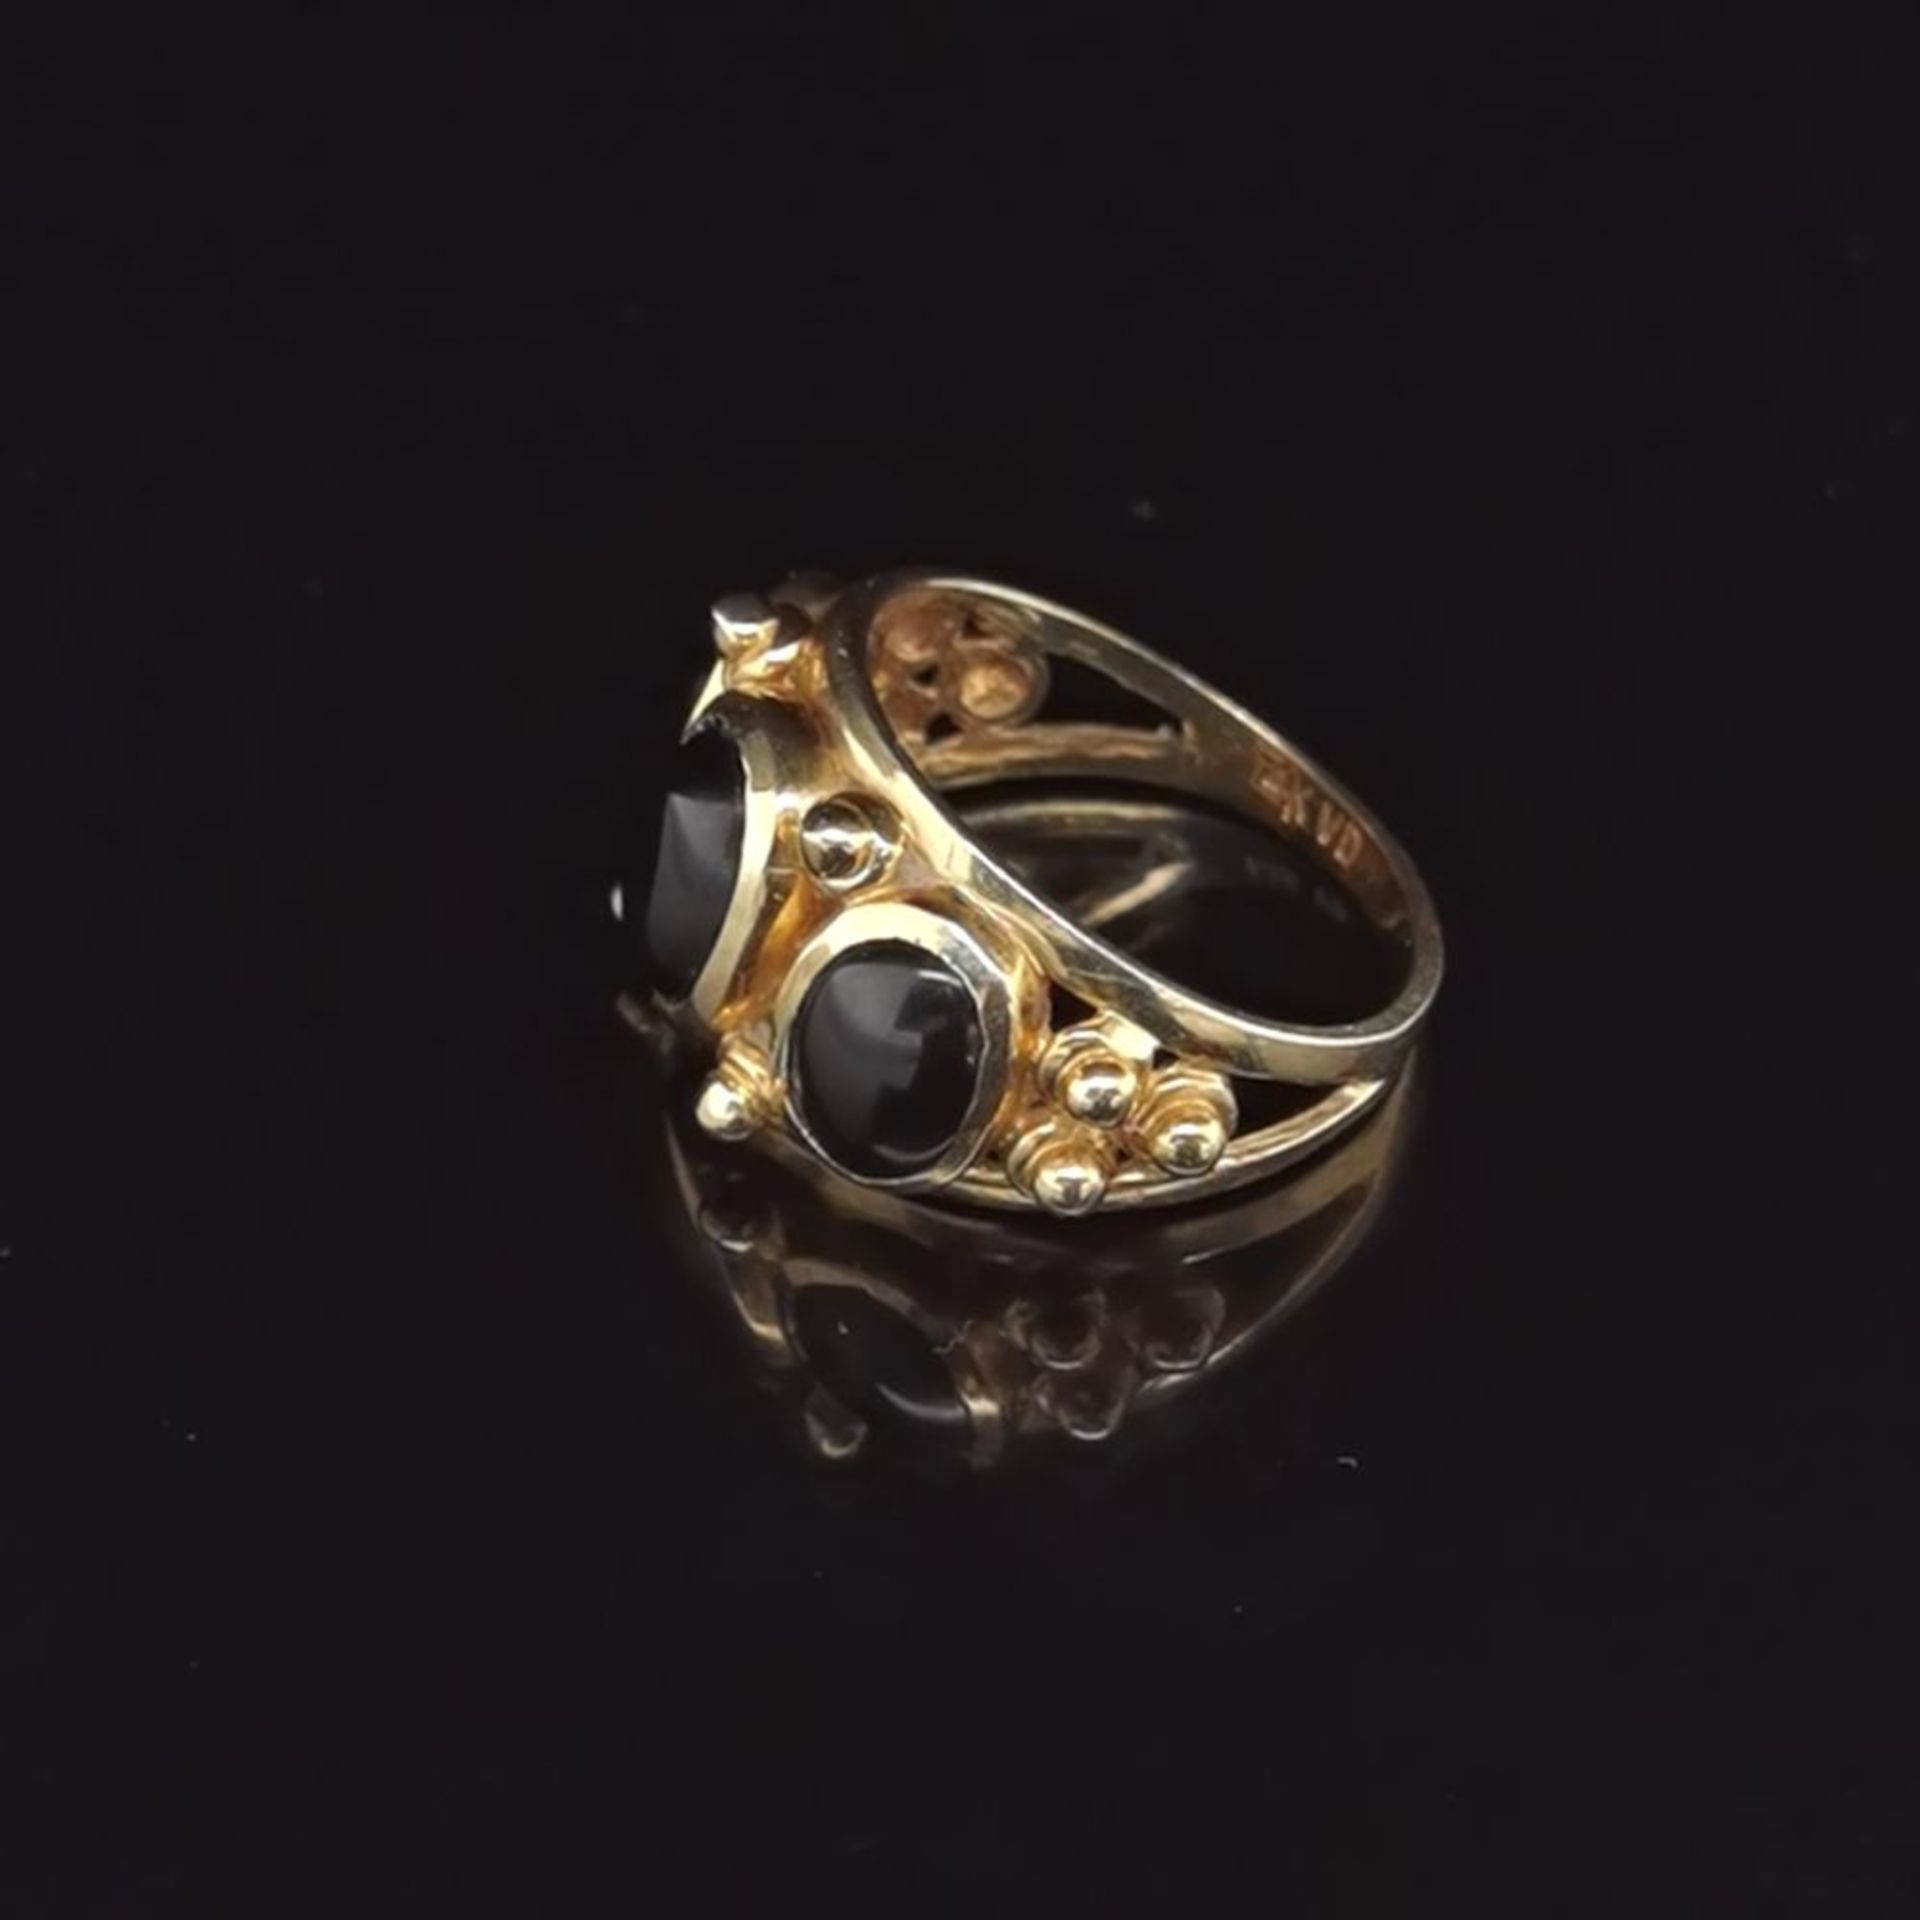 Onyx-Ring, 585 Gold 5,1 - Image 2 of 2